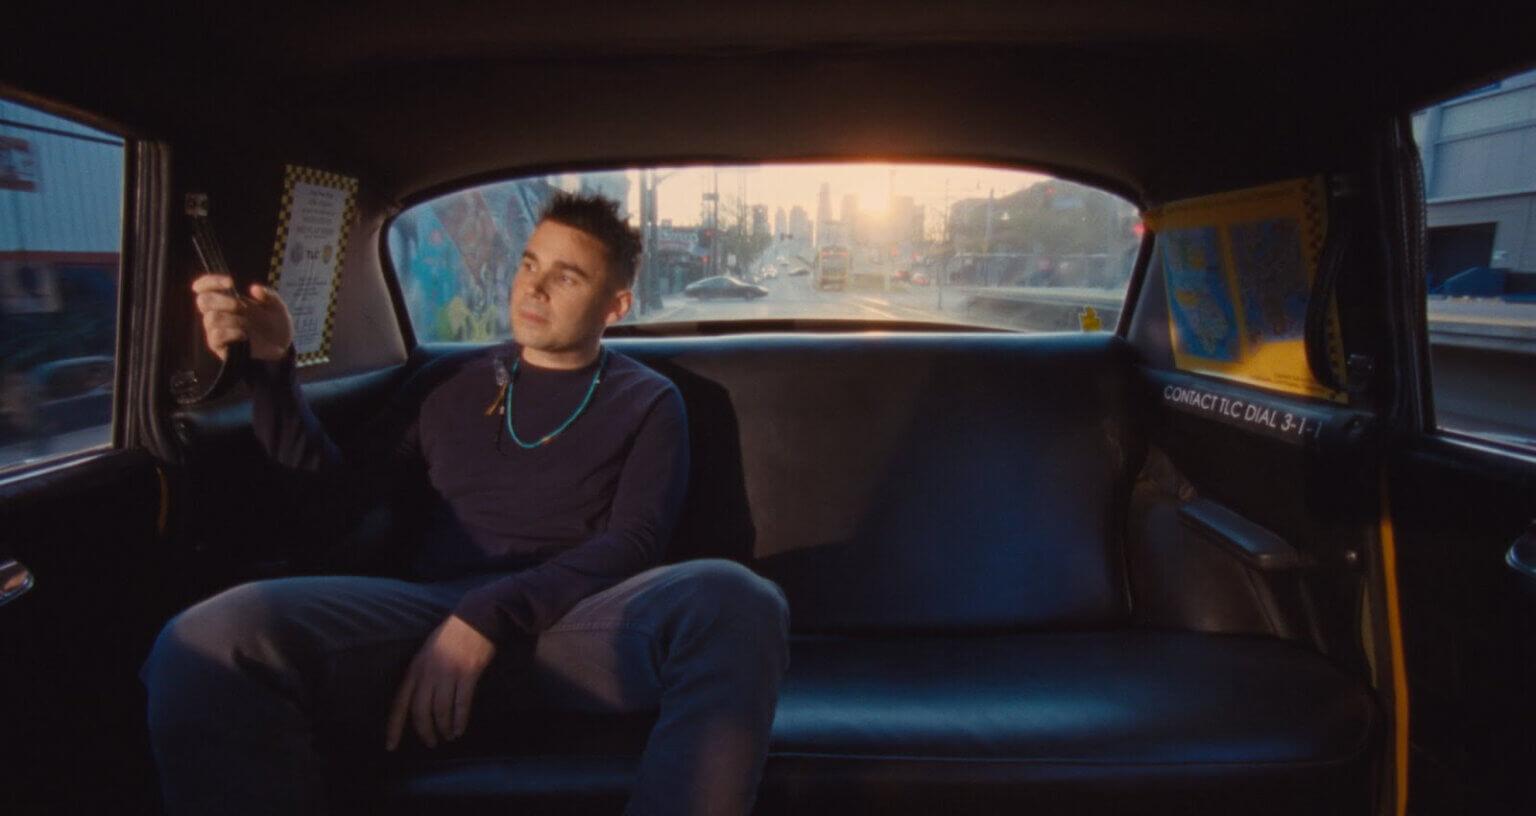 Rostam has released “From the Back of a Cab” - the new video and single off his forthcoming release Changephobia. The LP comes out June 4 2021